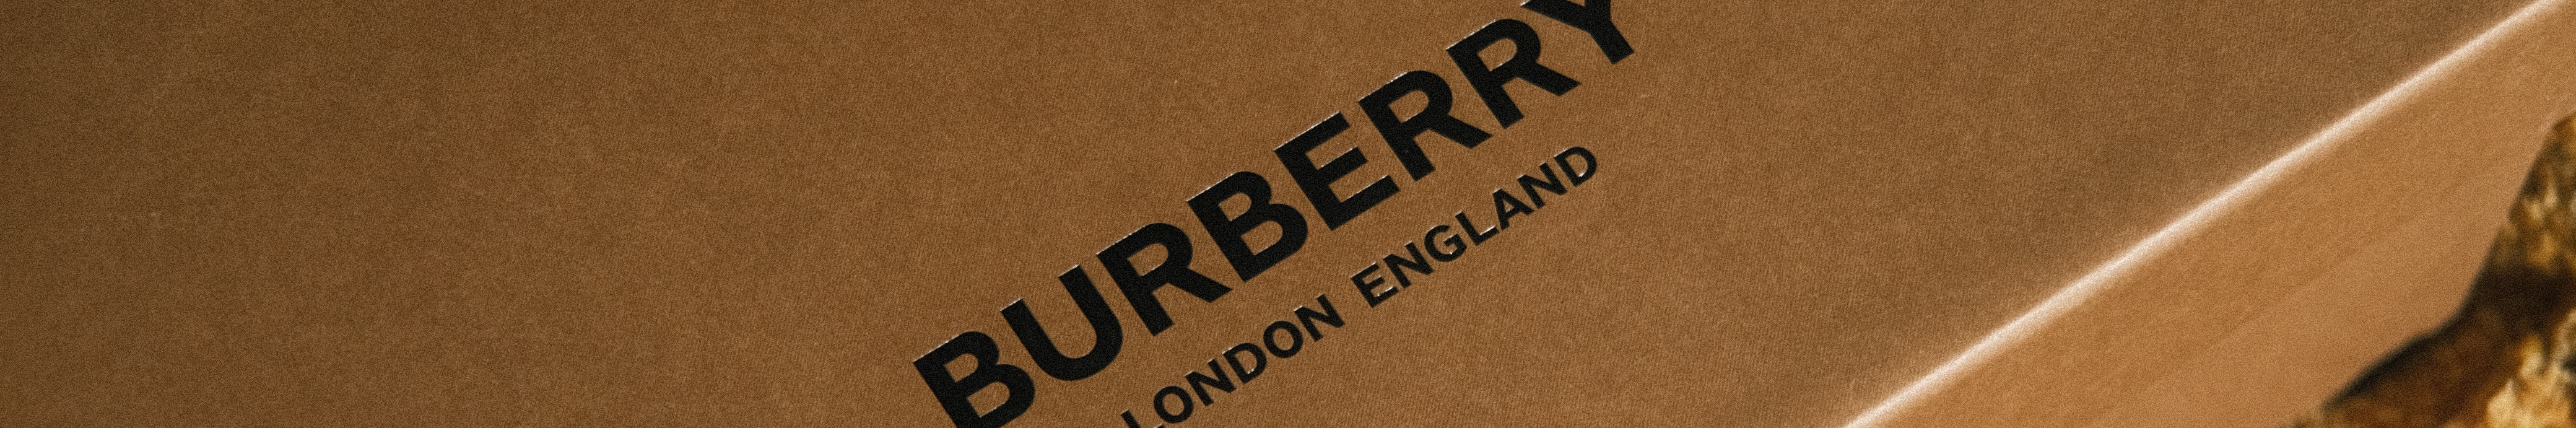 Burberry generated an estimated 1,300t of packaging waste in FY22; about 860t was not recycled